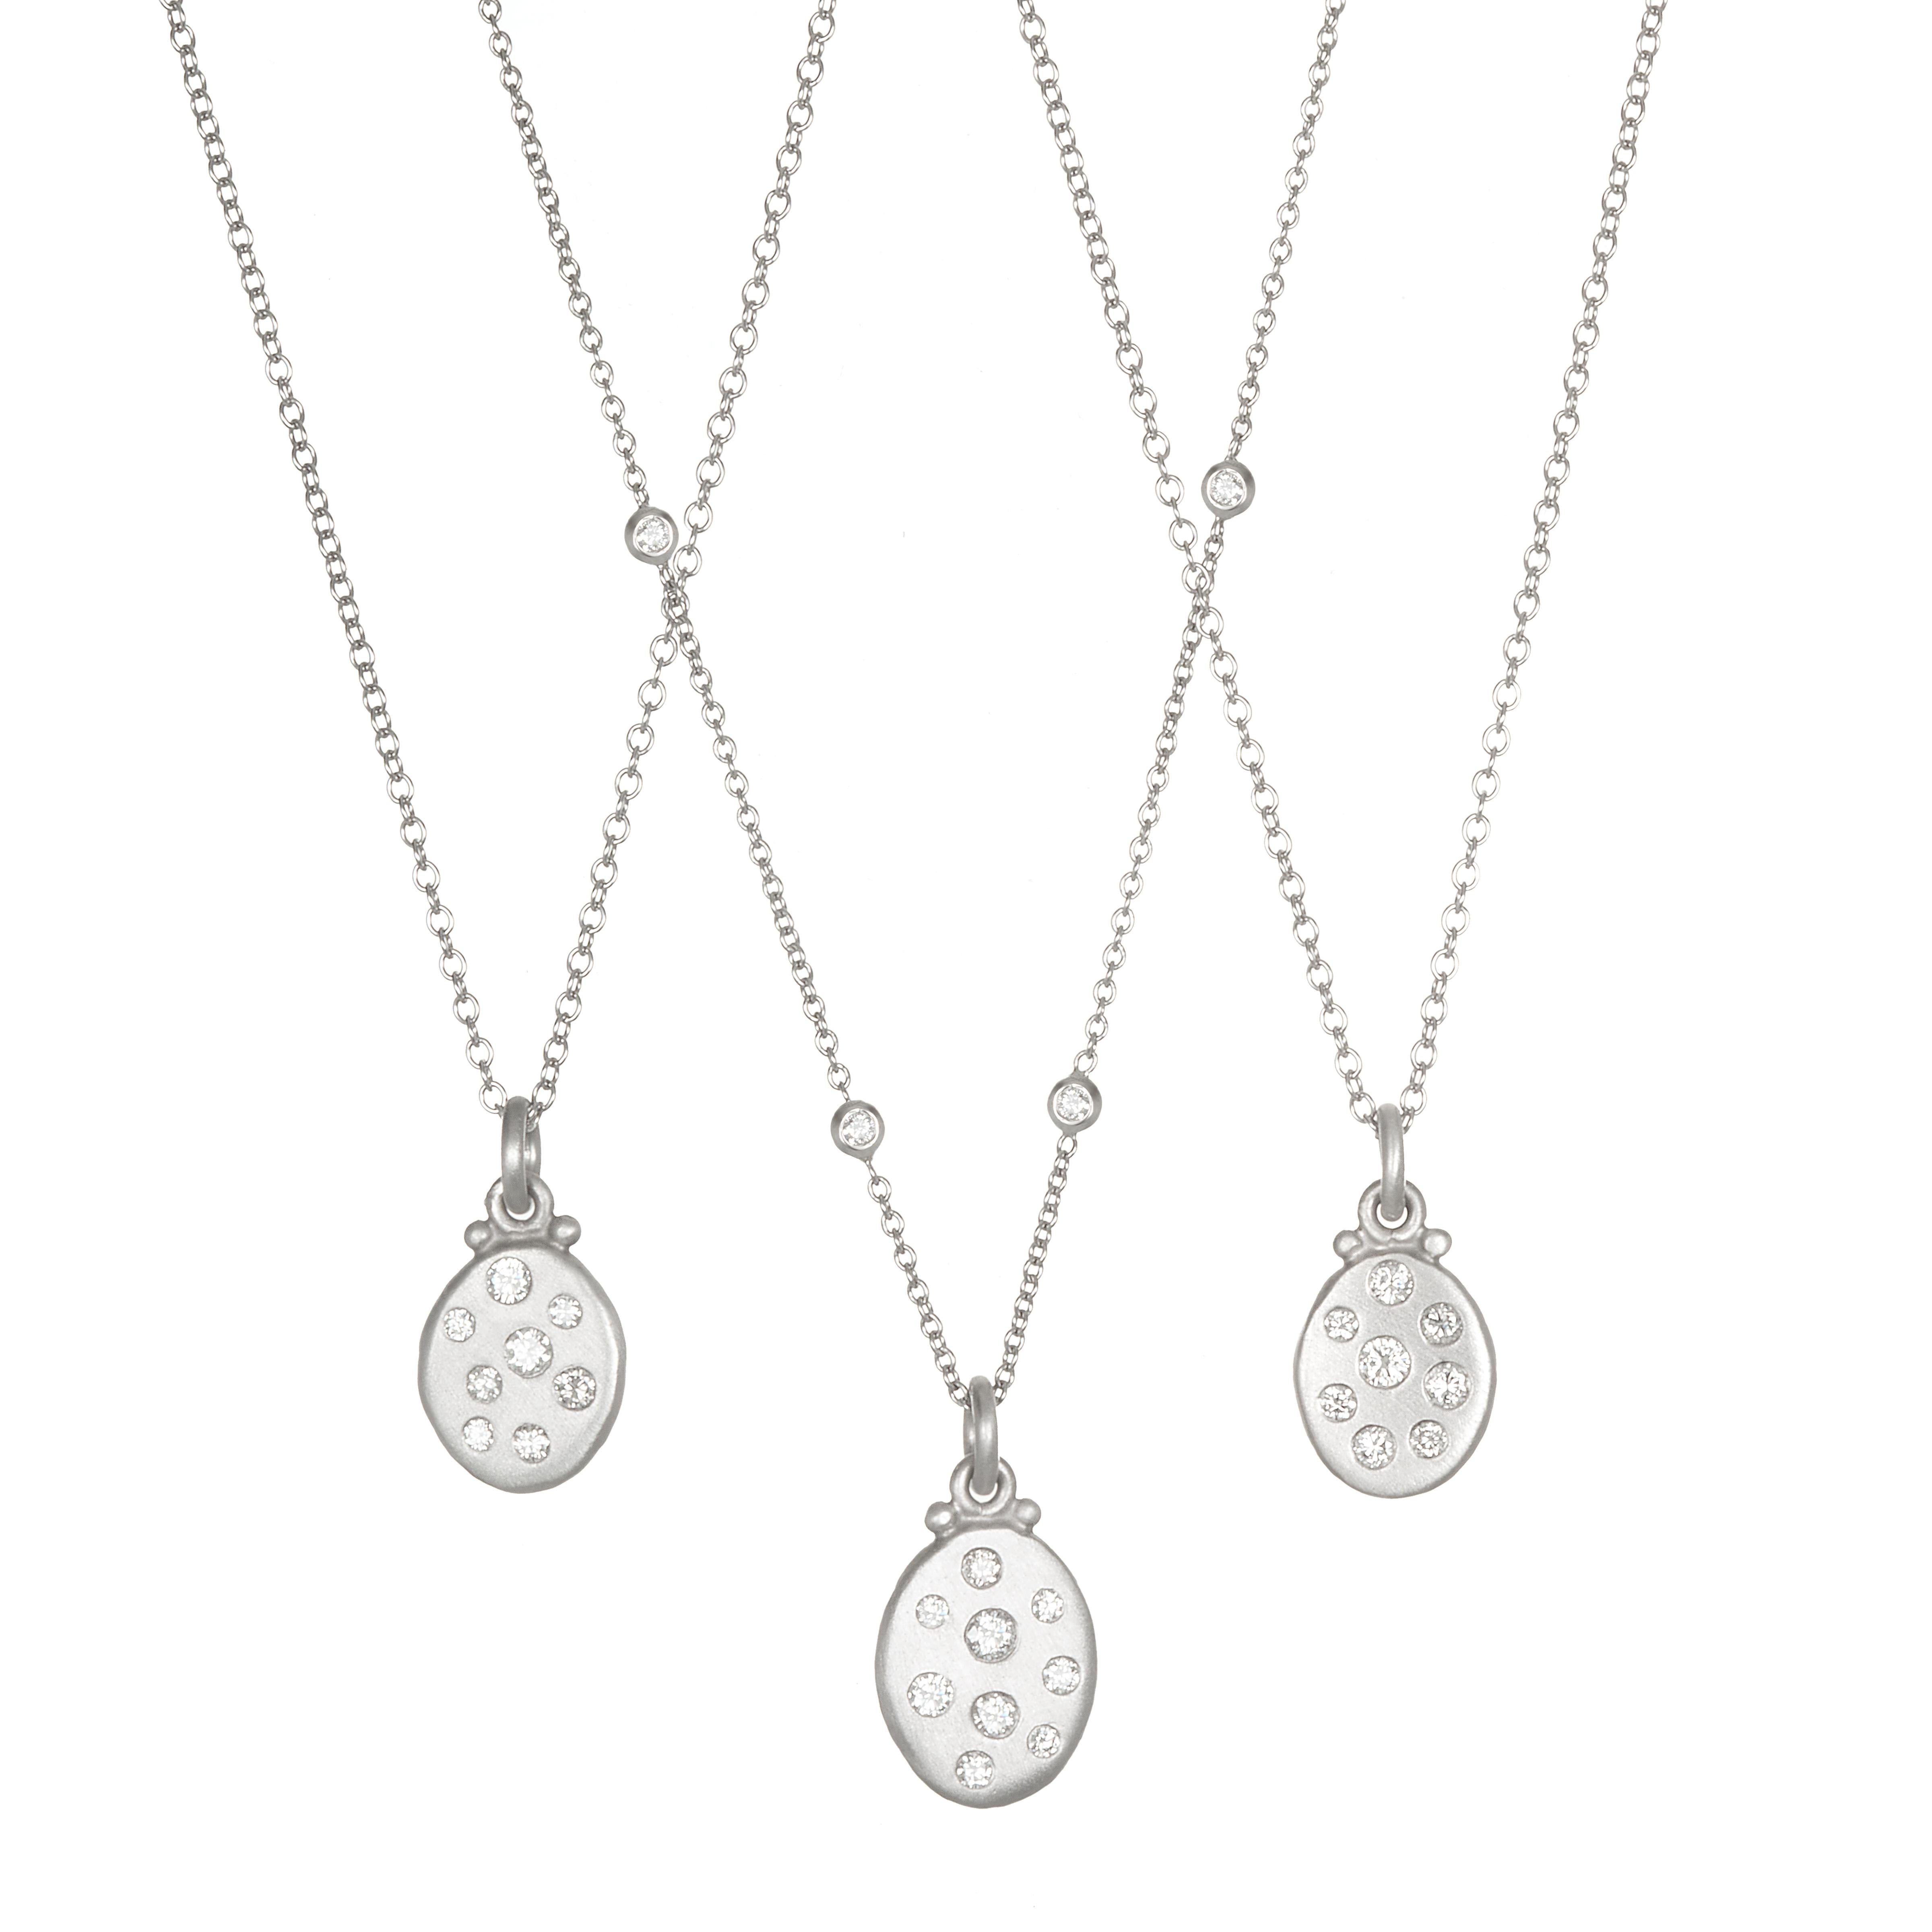 Versatile and easy to wear, the mini version of Faye's popular diamond Dog Tag pendants are perfect for everyday wear. The pendant is matte-finished in Platinum and hangs on a diamond station necklace for added sparkle. Whether worn alone or